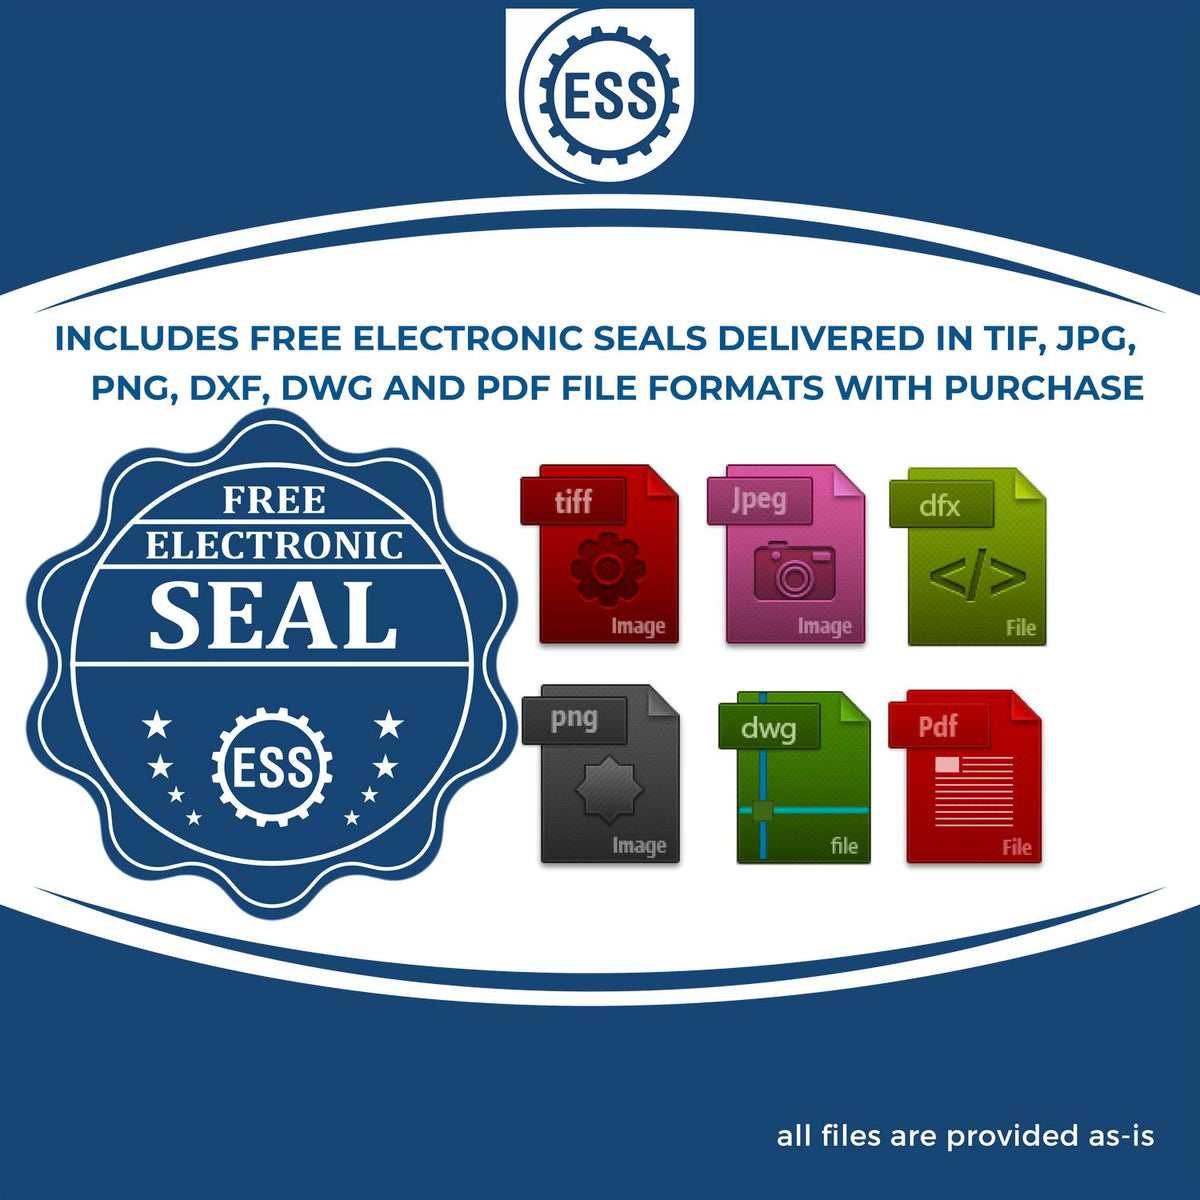 An infographic for the free electronic seal for the Wooden Handle Vermont State Seal Notary Public Stamp illustrating the different file type icons such as DXF, DWG, TIF, JPG and PNG.